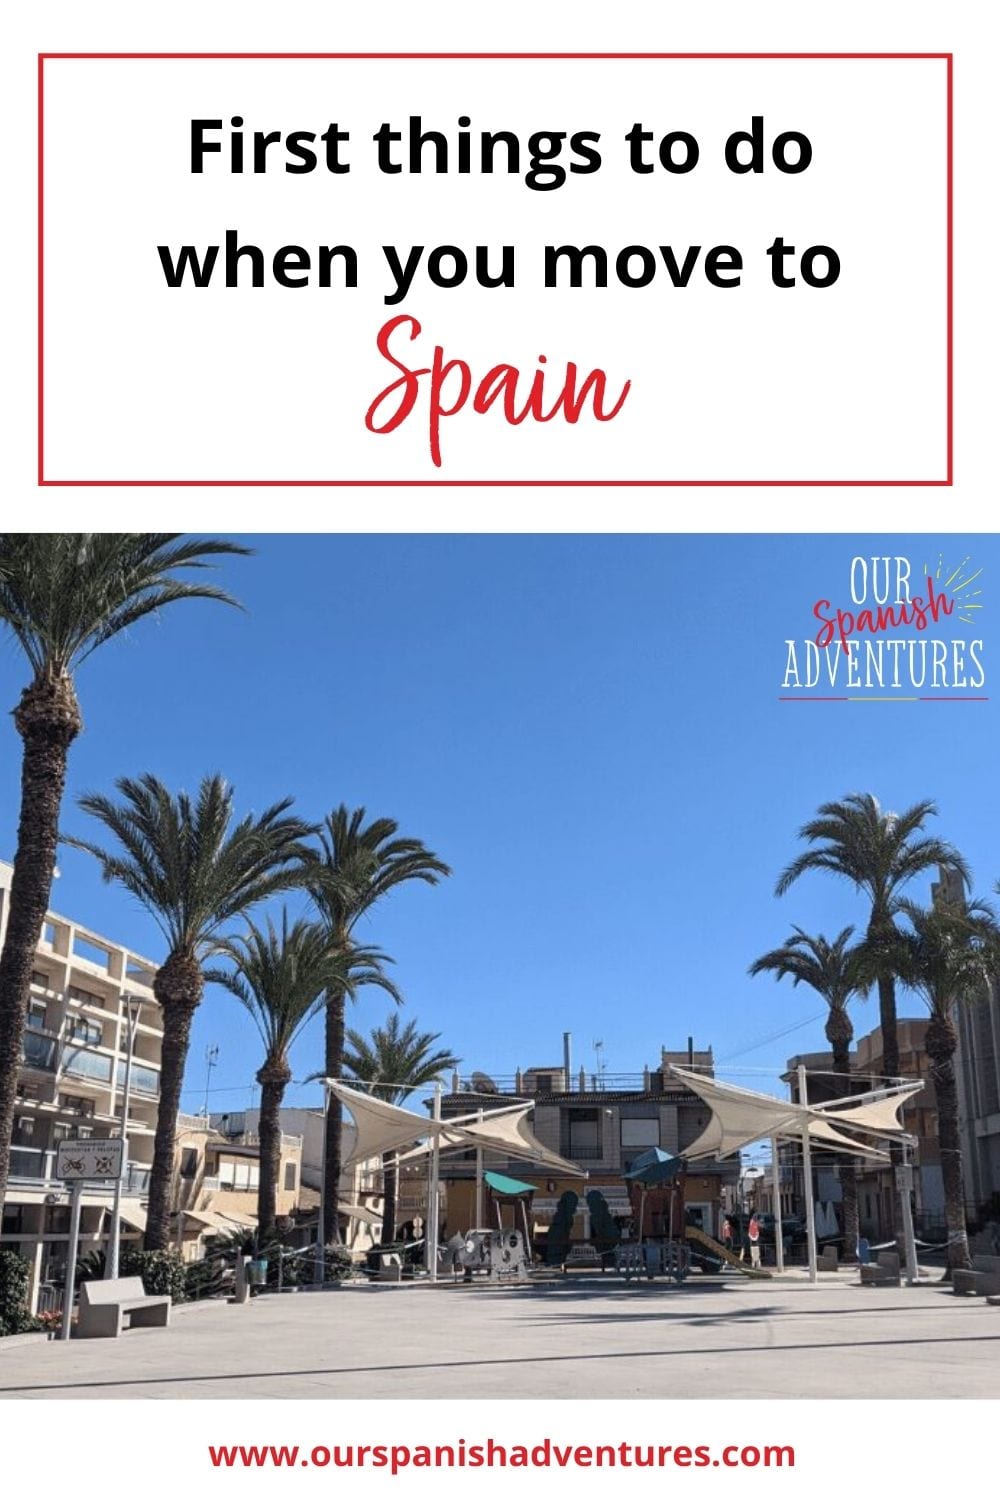 First things to do when you move to Spain | Our Spanish Adventures